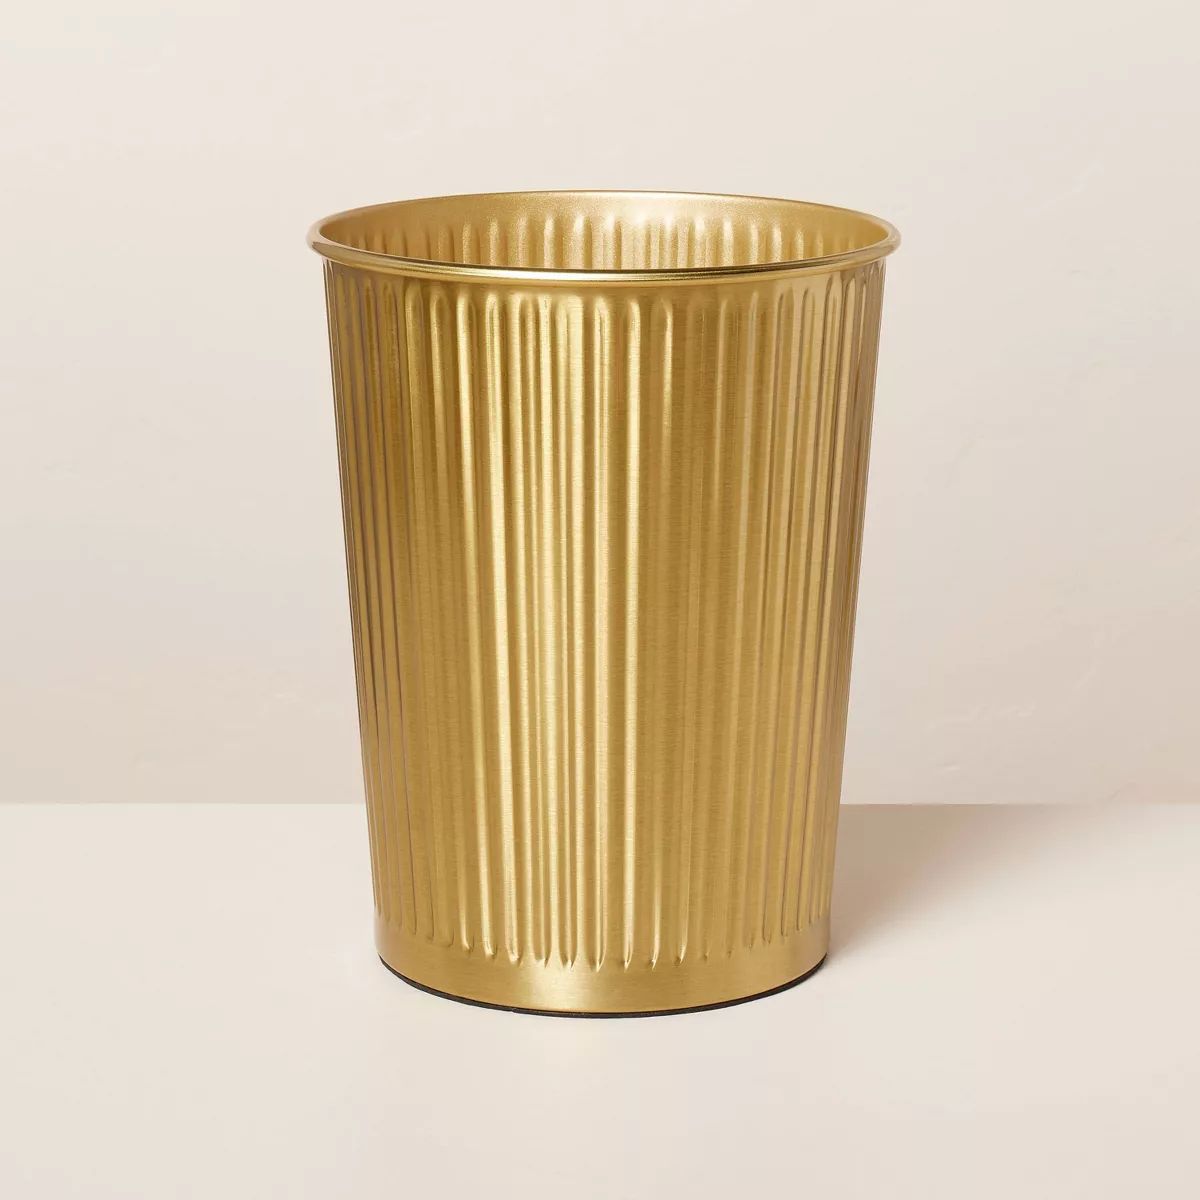 2.4gal Fluted Metal Bath Wastebasket Brass Finish - Hearth & Hand™ with Magnolia | Target